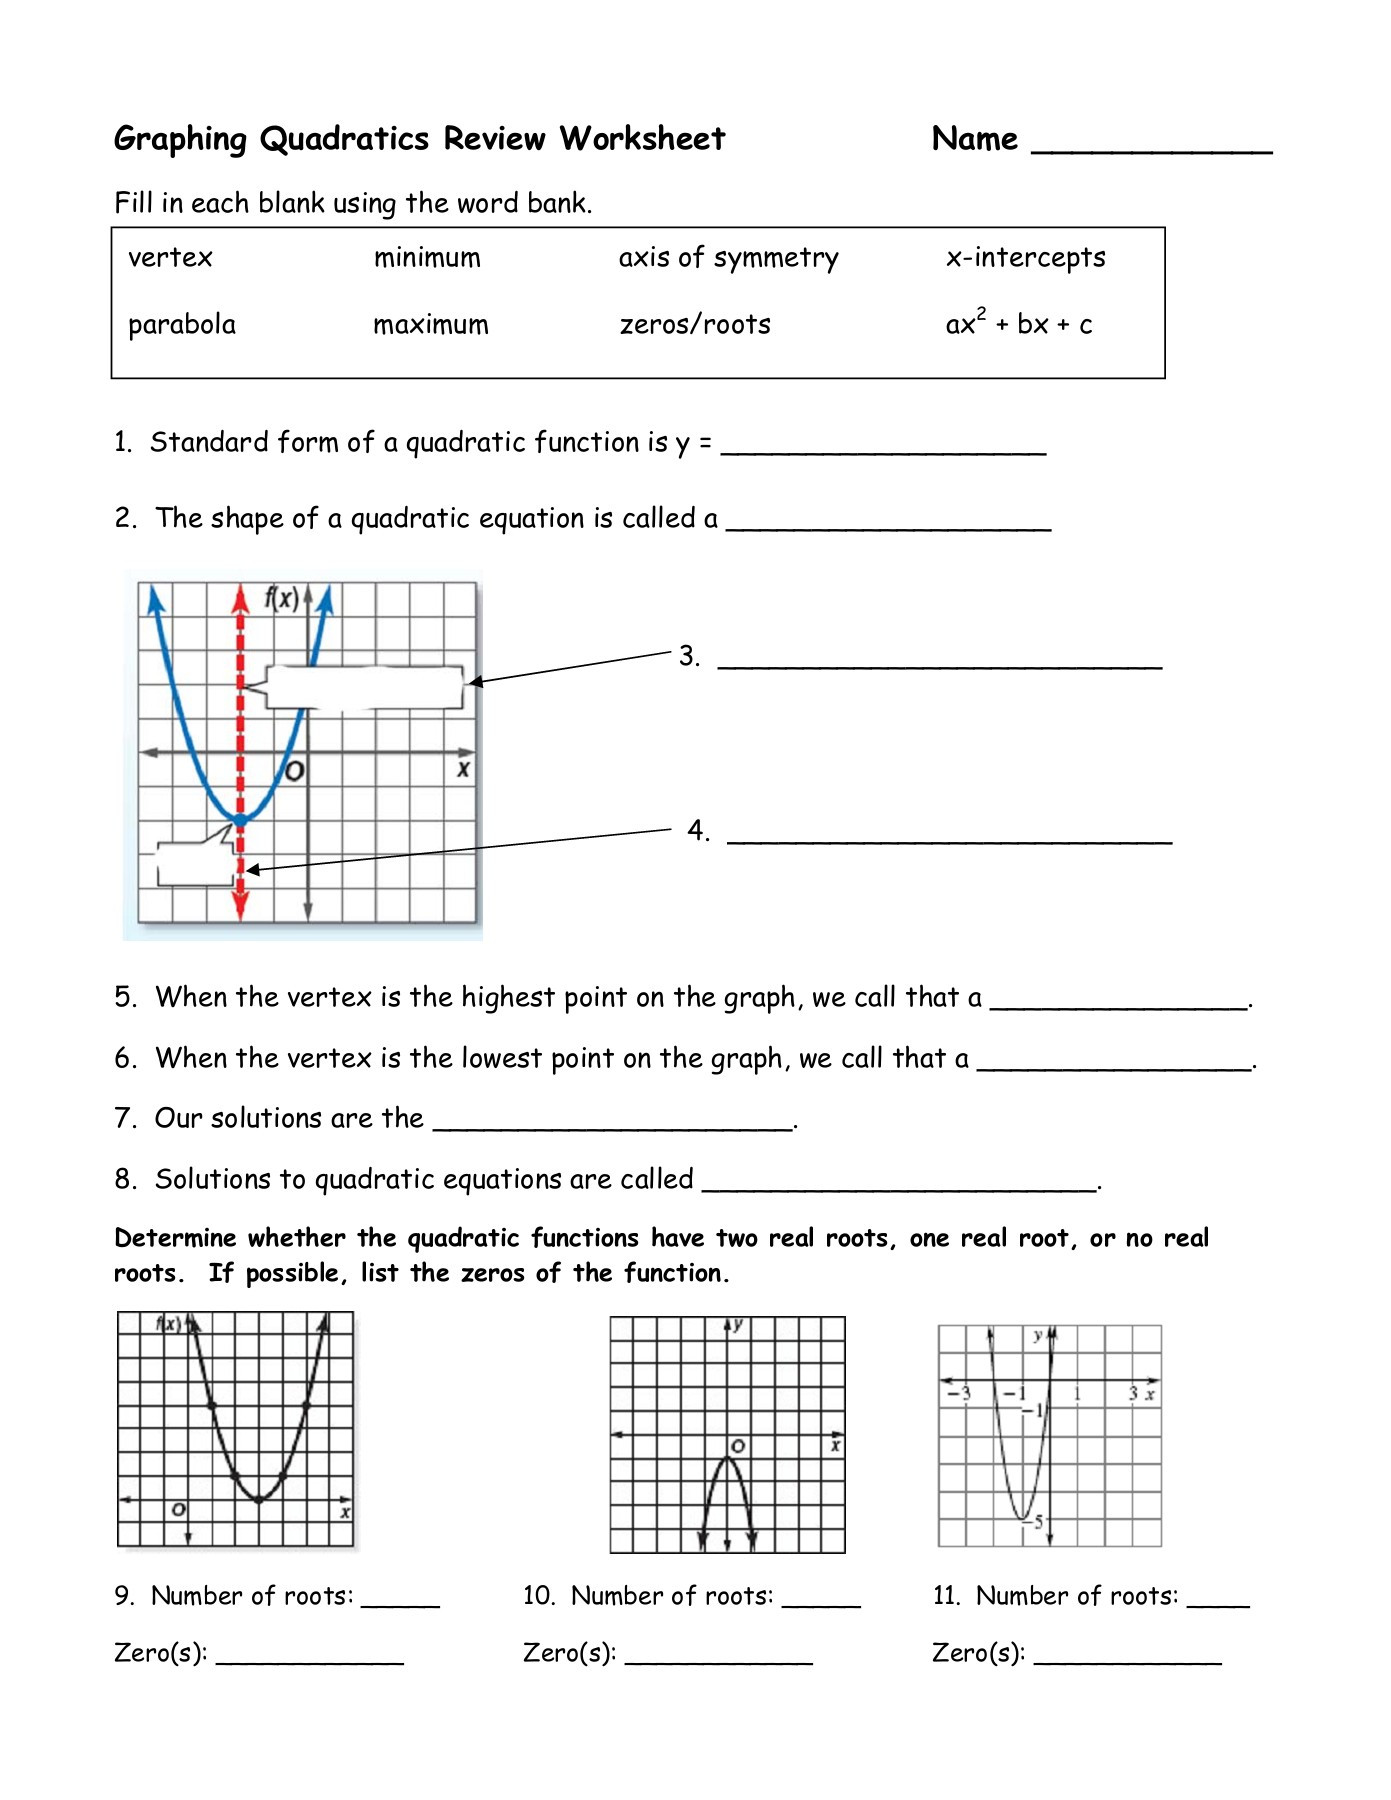 Graphing Quadratic Functions Worksheet Graphing Quadratics Review Worksheet Name Wikispaces Pages